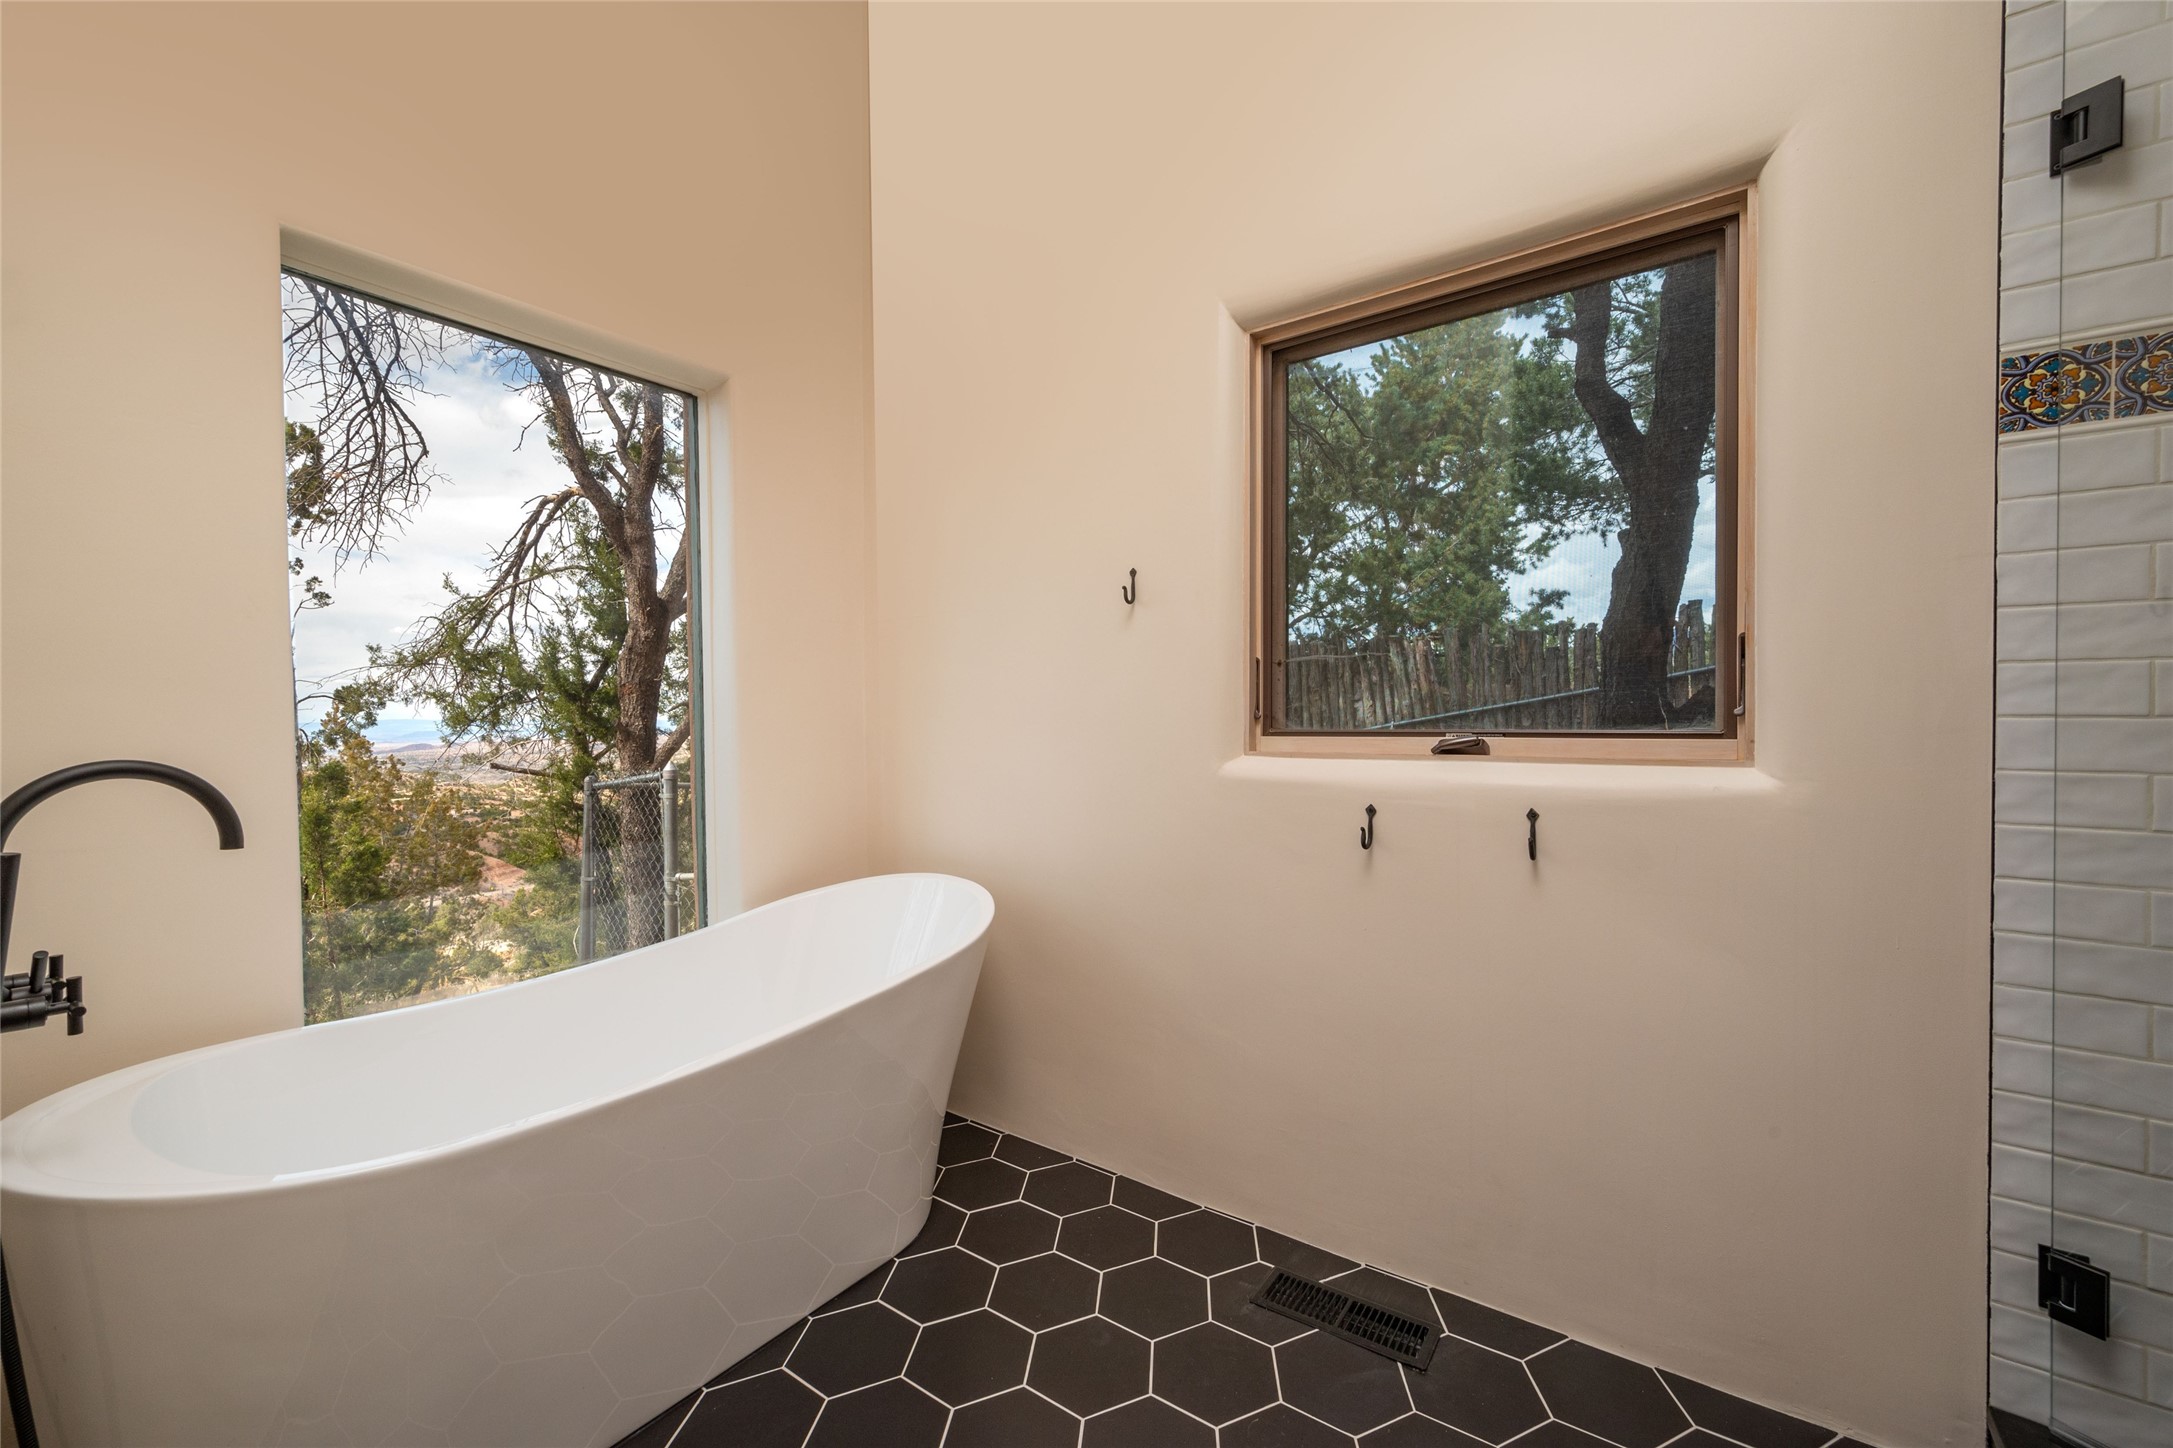 145 Brownell Howland, Santa Fe, New Mexico 87501, 4 Bedrooms Bedrooms, ,4 BathroomsBathrooms,Residential,For Sale,145 Brownell Howland,202401318